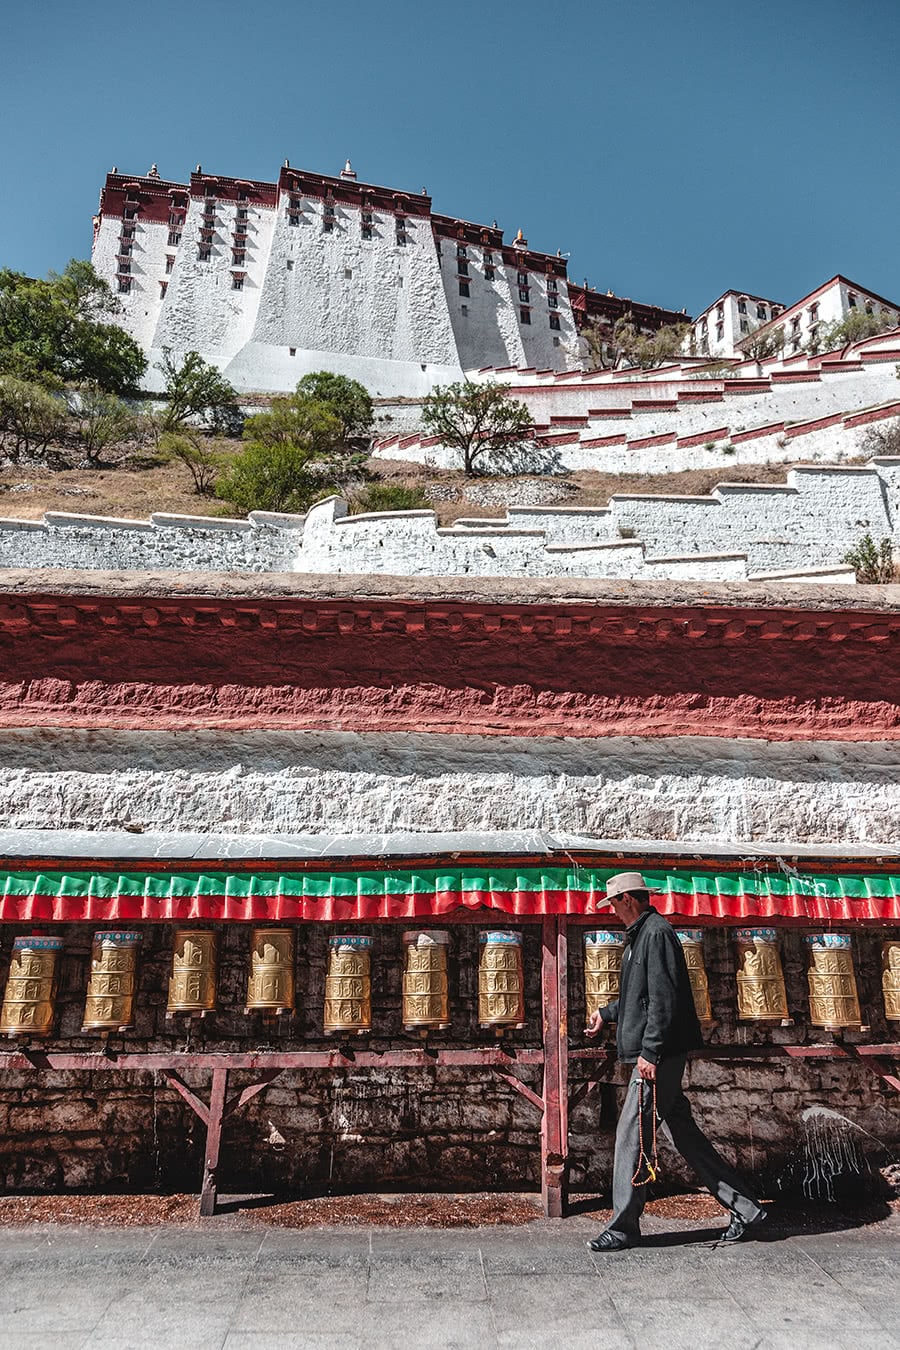 A man spins prayer wheels with the Potala Palace in the background.